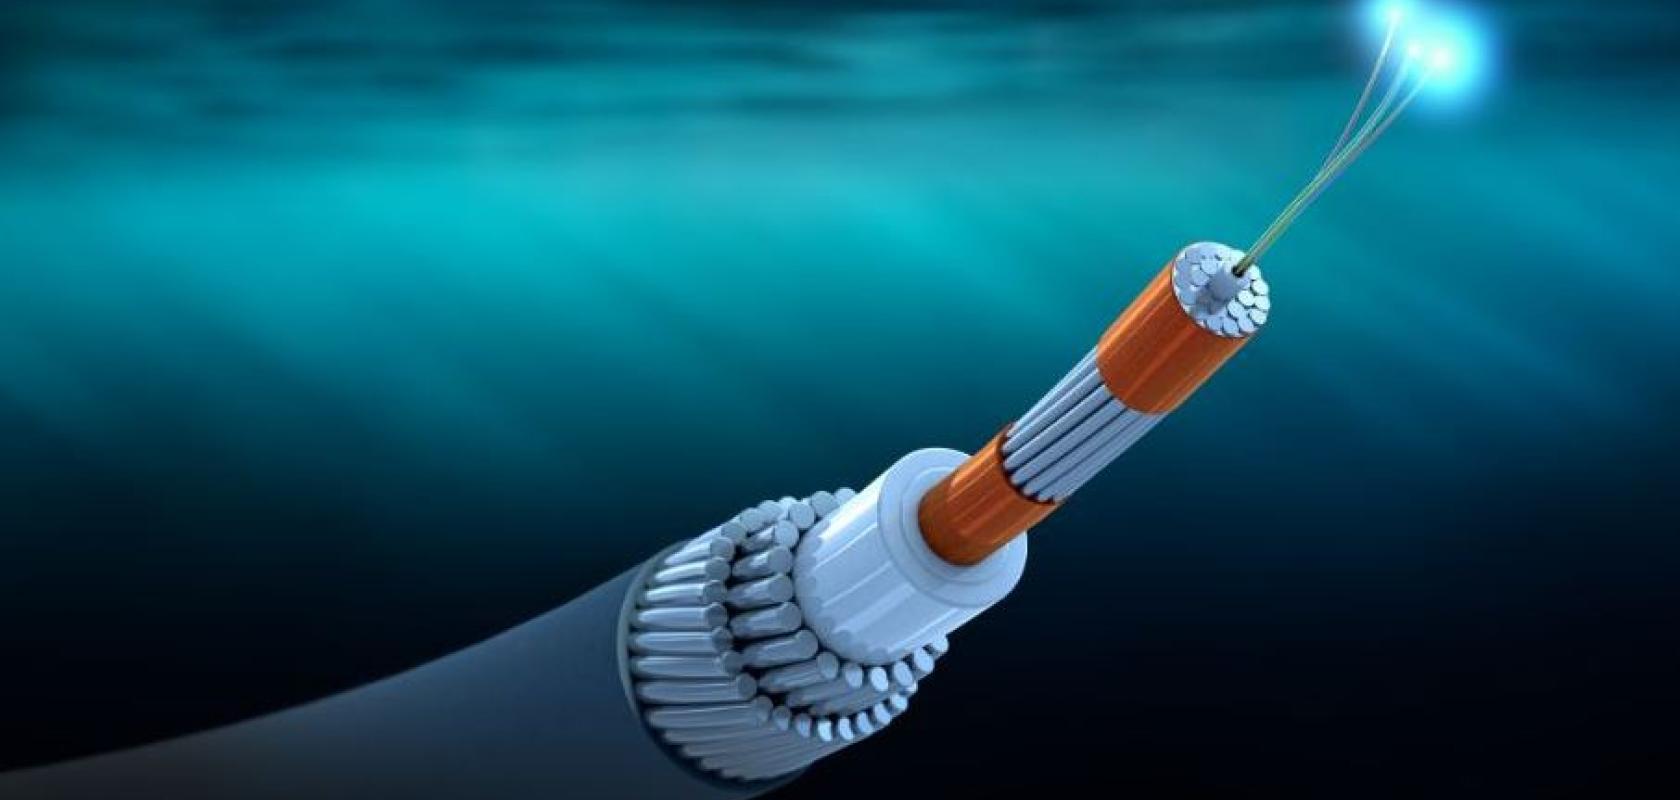 Subsea cable connecting Isle of Man, Ireland goes live